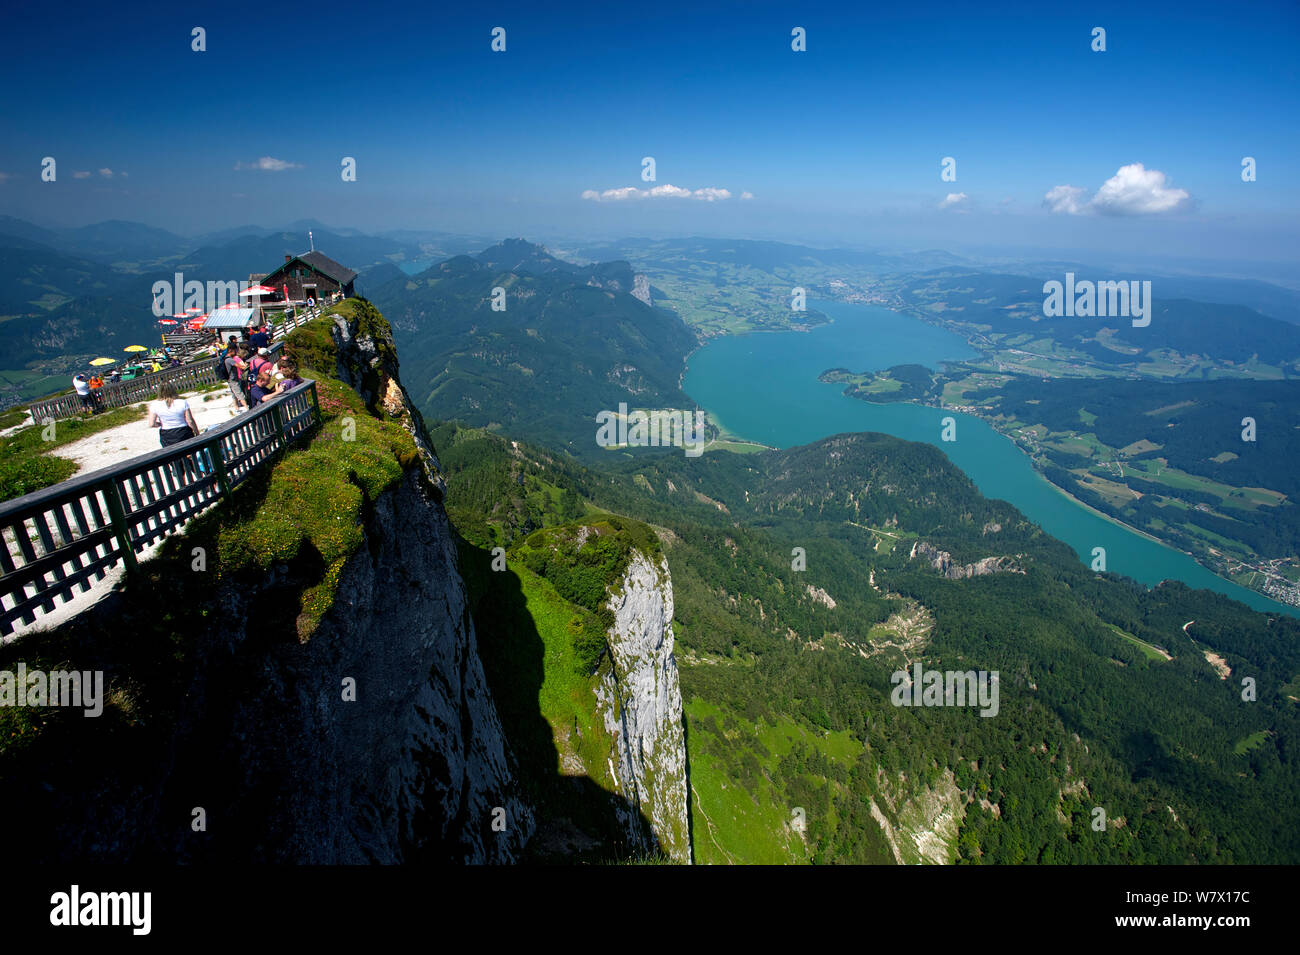 Mondsee lake seen from the top of Mount Shafberg with tourist facilities during summer. Austria, July 2013. Stock Photo